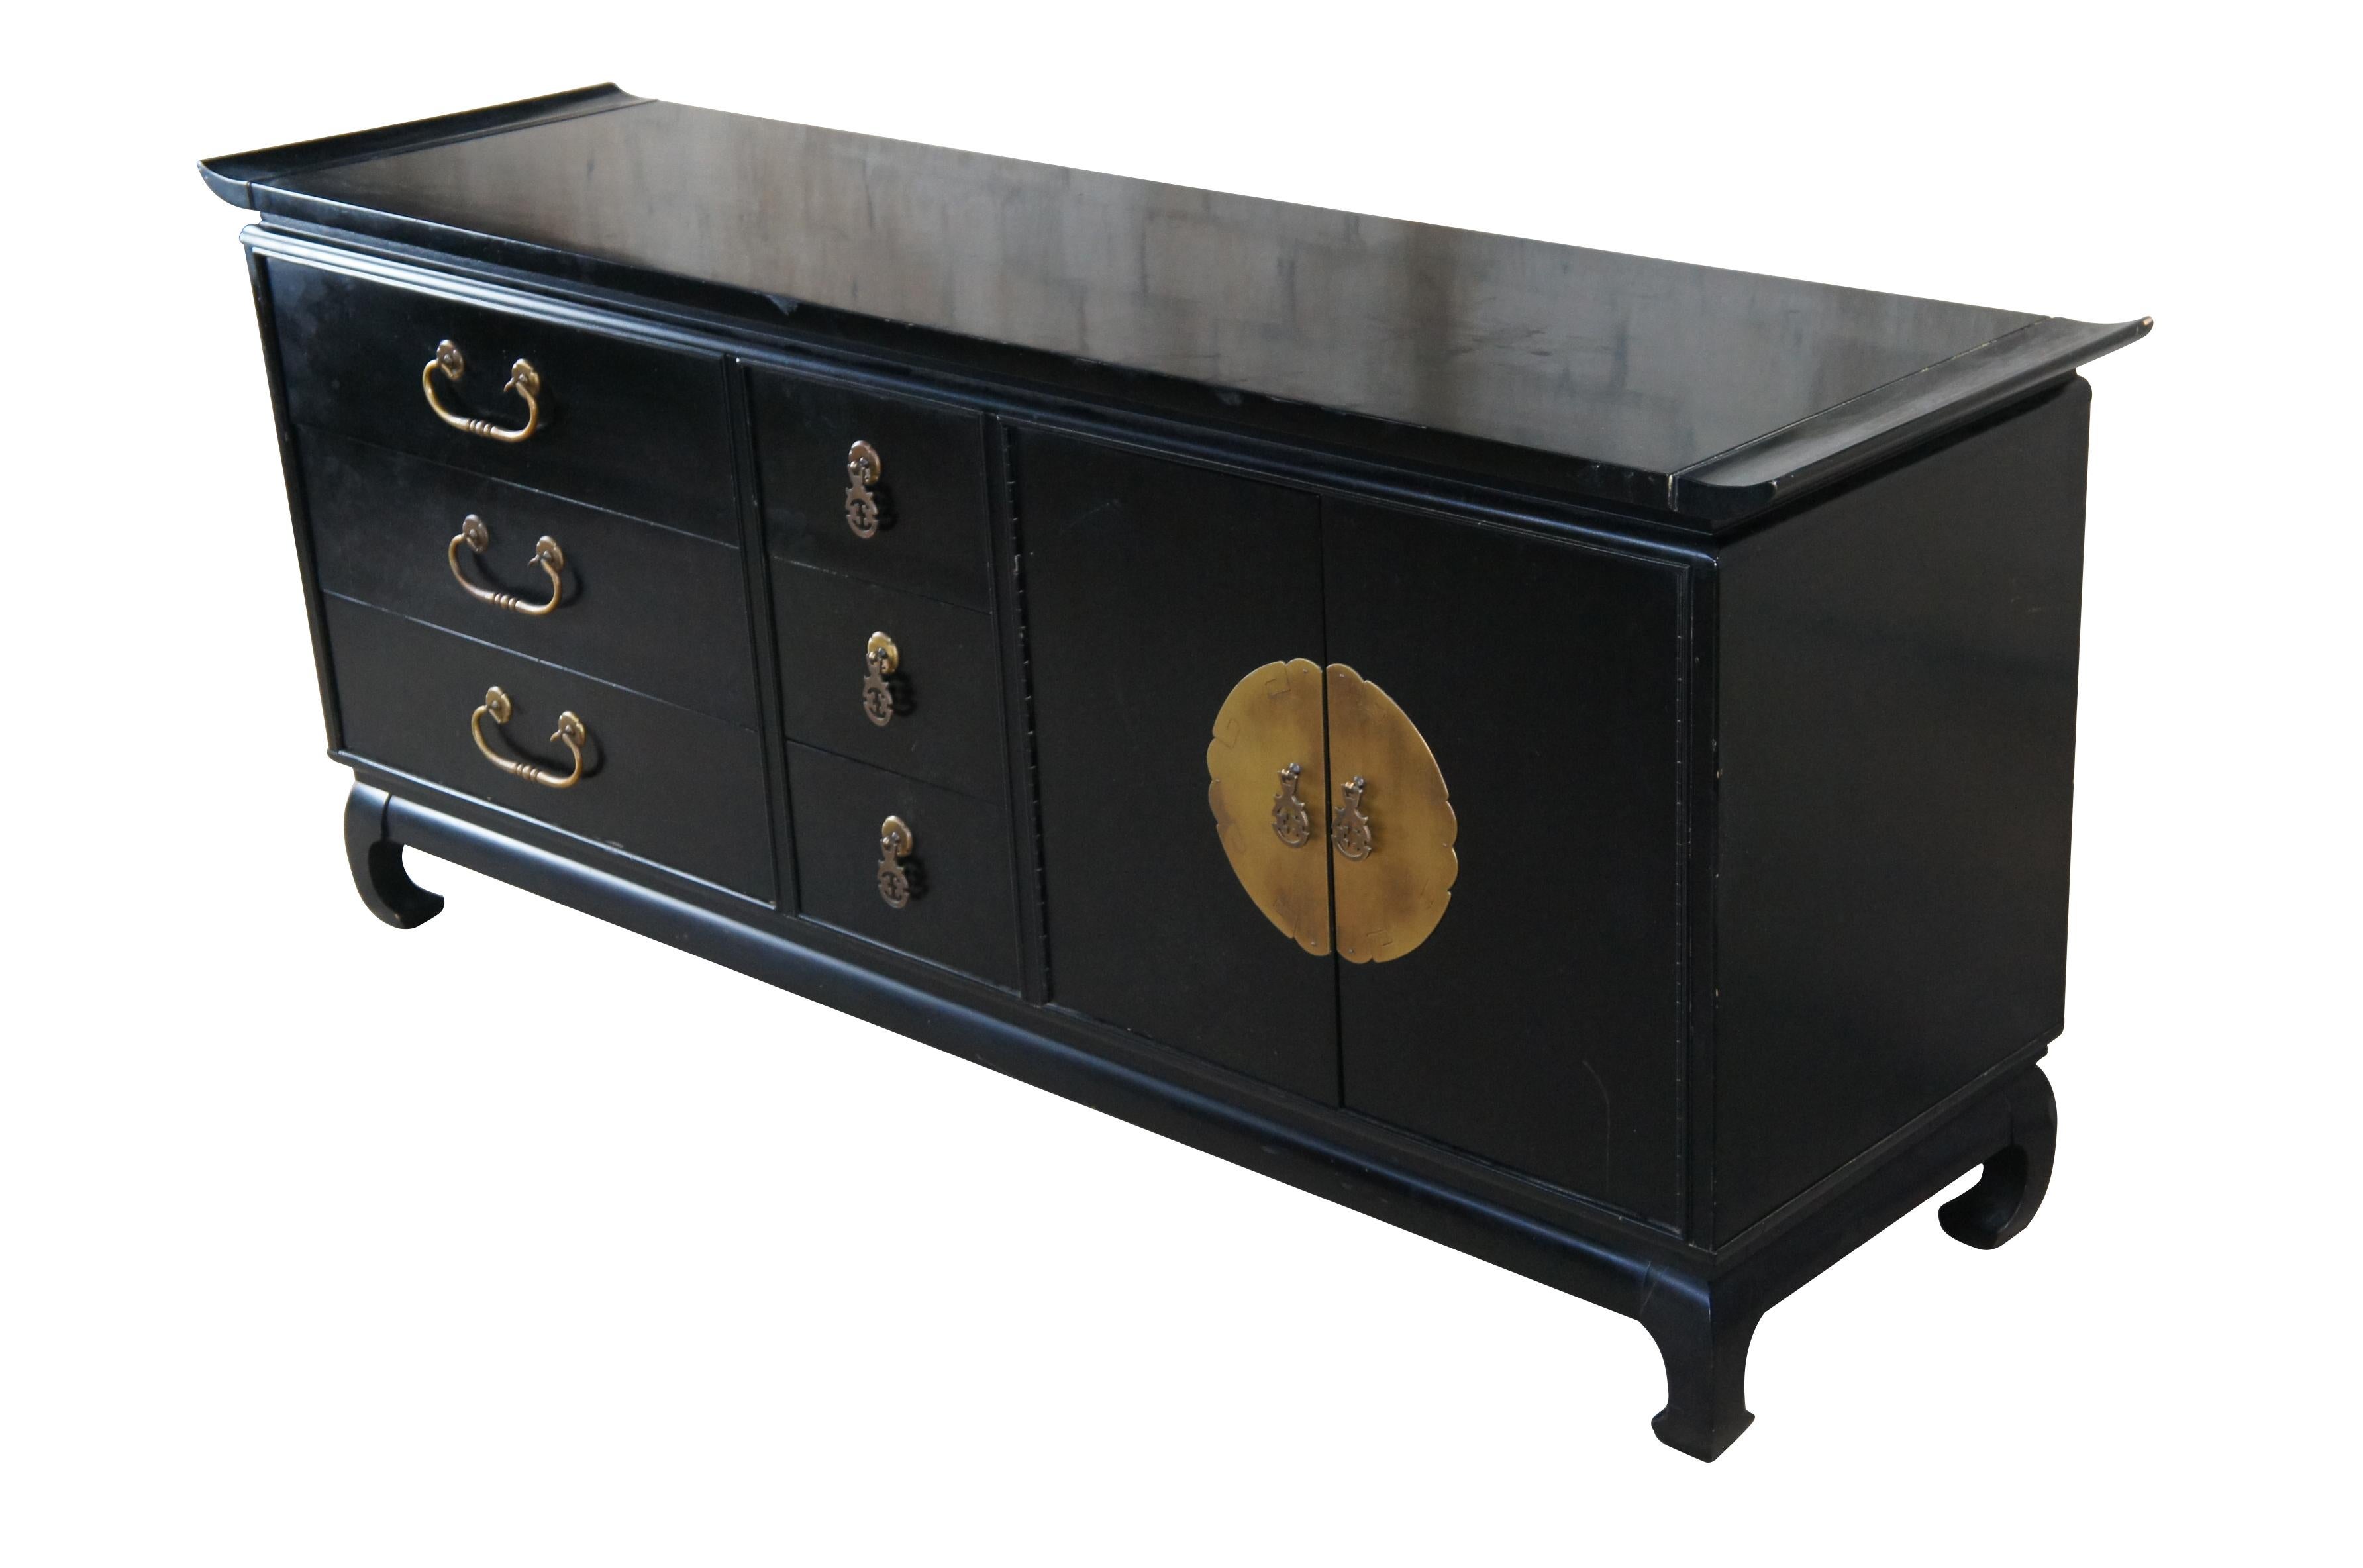 Mid century modern Kent Coffey Amerasia collection black lacquered sideboard / buffet / credenza / console or dresser featuring chinoiserie styling with nine drawers, flared top, brass hardware and ming style feet.

 The Kent-Coffey Manufacturing